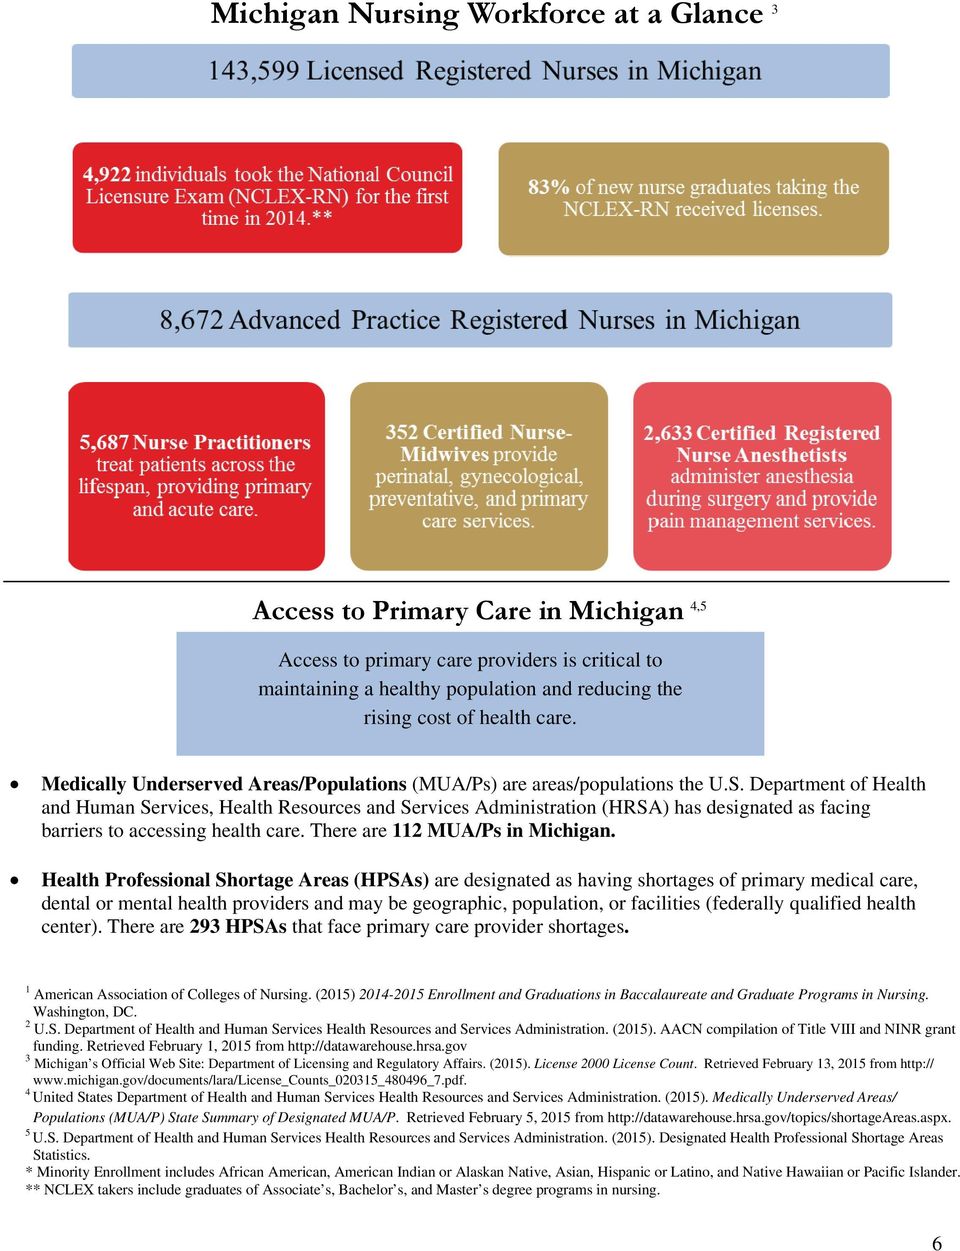 Department of Health and Human Services, Health Resources and Services Administration (HRSA) has designated as facing barriers to accessing health care. There are 112 MUA/Ps in Michigan.